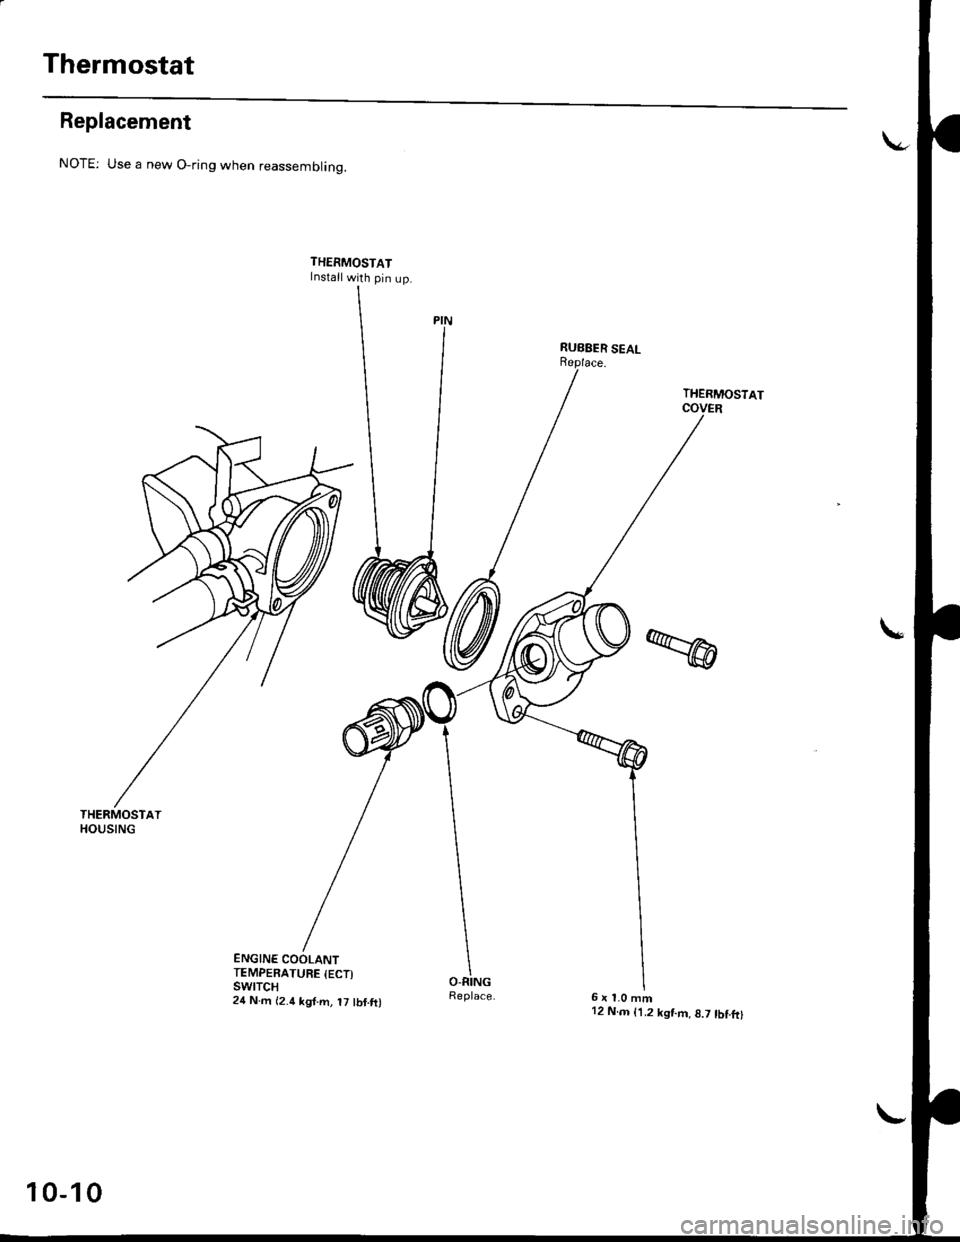 HONDA CIVIC 1998 6.G Workshop Manual Thermostat
Replacement
THERMOSTATHOUSING
NOTE: Use a new O-ring when reassemblinq.
THERMOSTATInstall with pin up.
ENGINE COOLANTTEMPERATURE {ECT)swtTcH24 N.m {2.4 kgf.m, t7 tbf.ft)
THERMOSTAT
6x1.0mm1